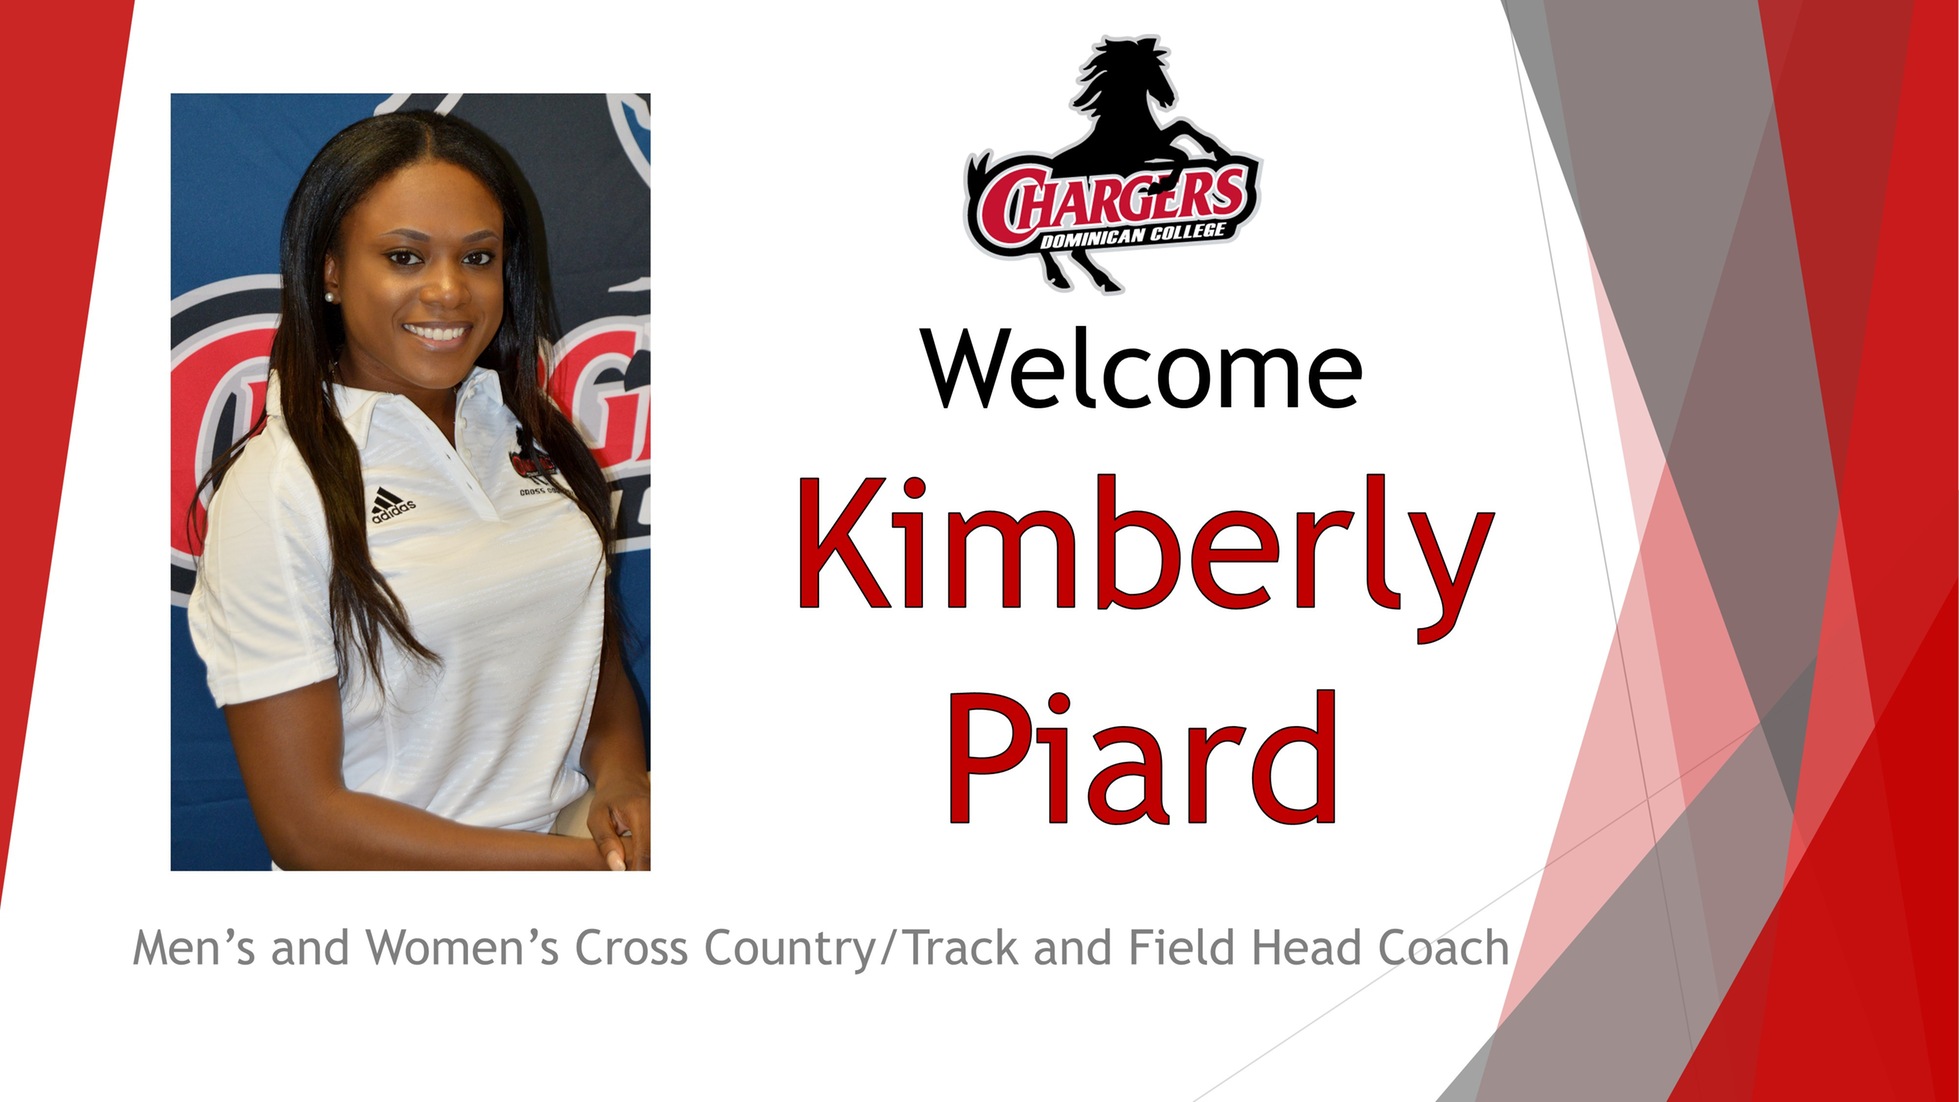 PIARD NAMED HEAD MEN’S AND WOMEN’S CROSS COUNTRY/TRACK AND FIELD COACH